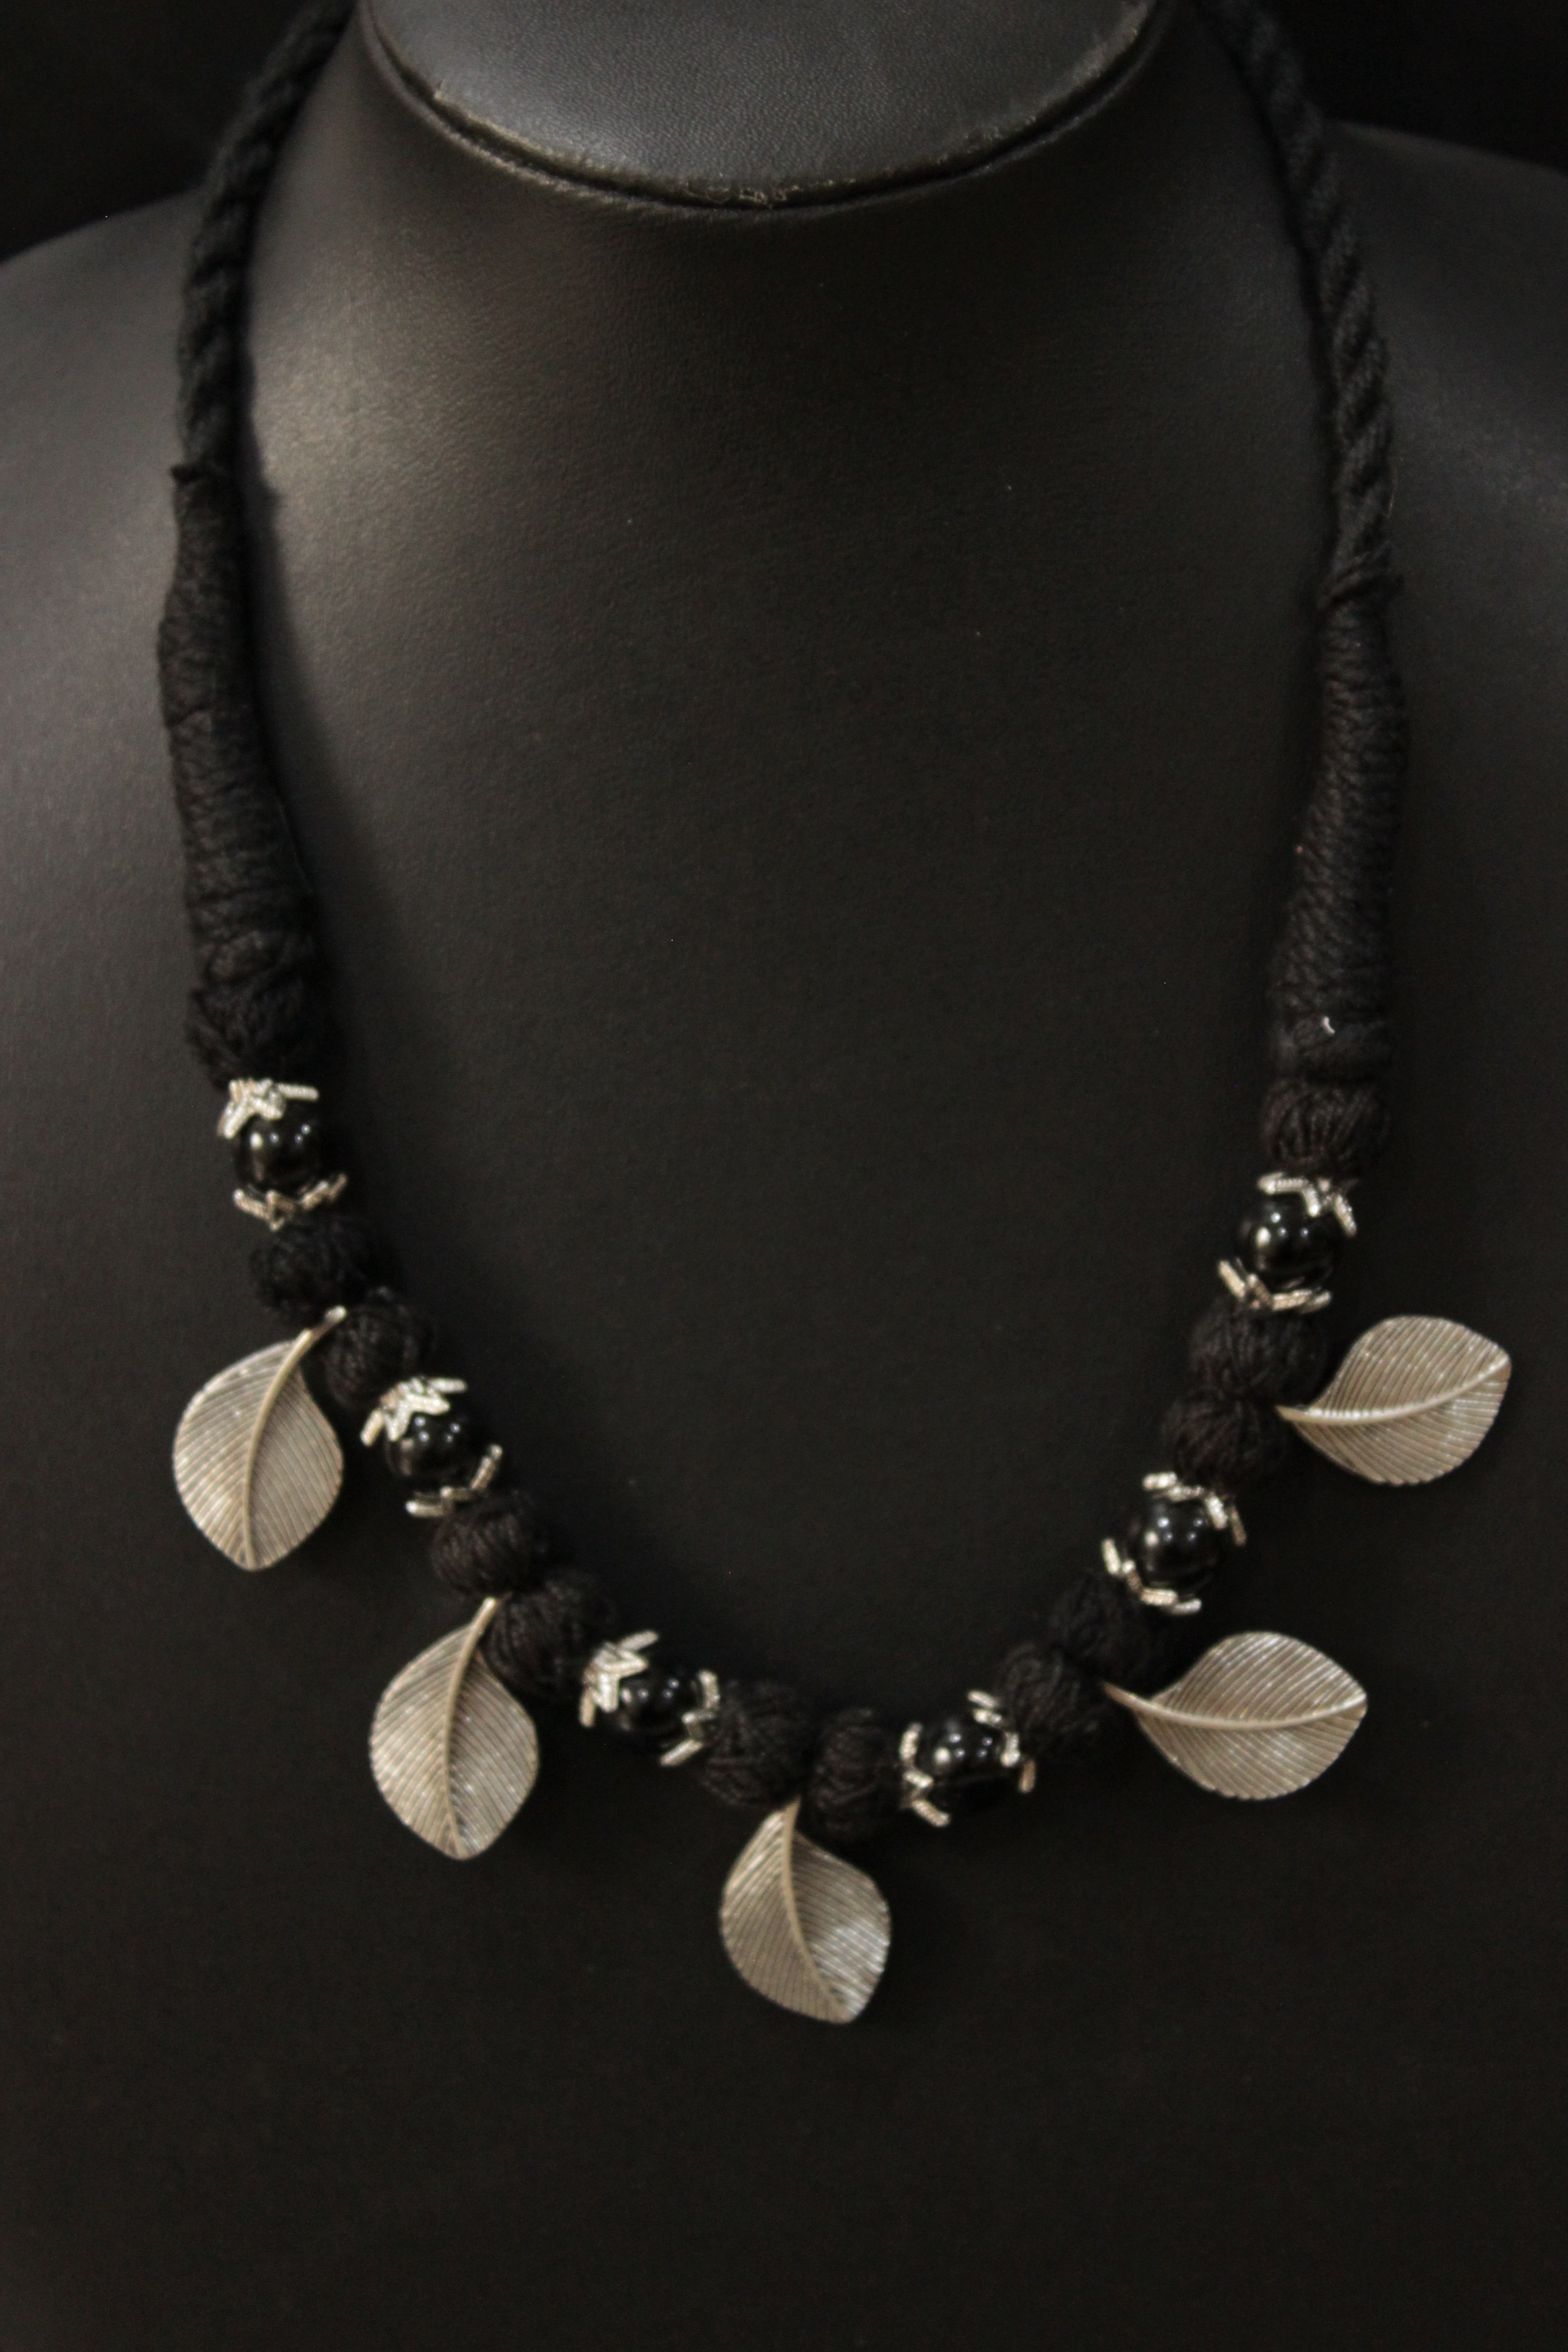 Delicate Leaf Charms Fabric Beads Black Thread Braided Necklace